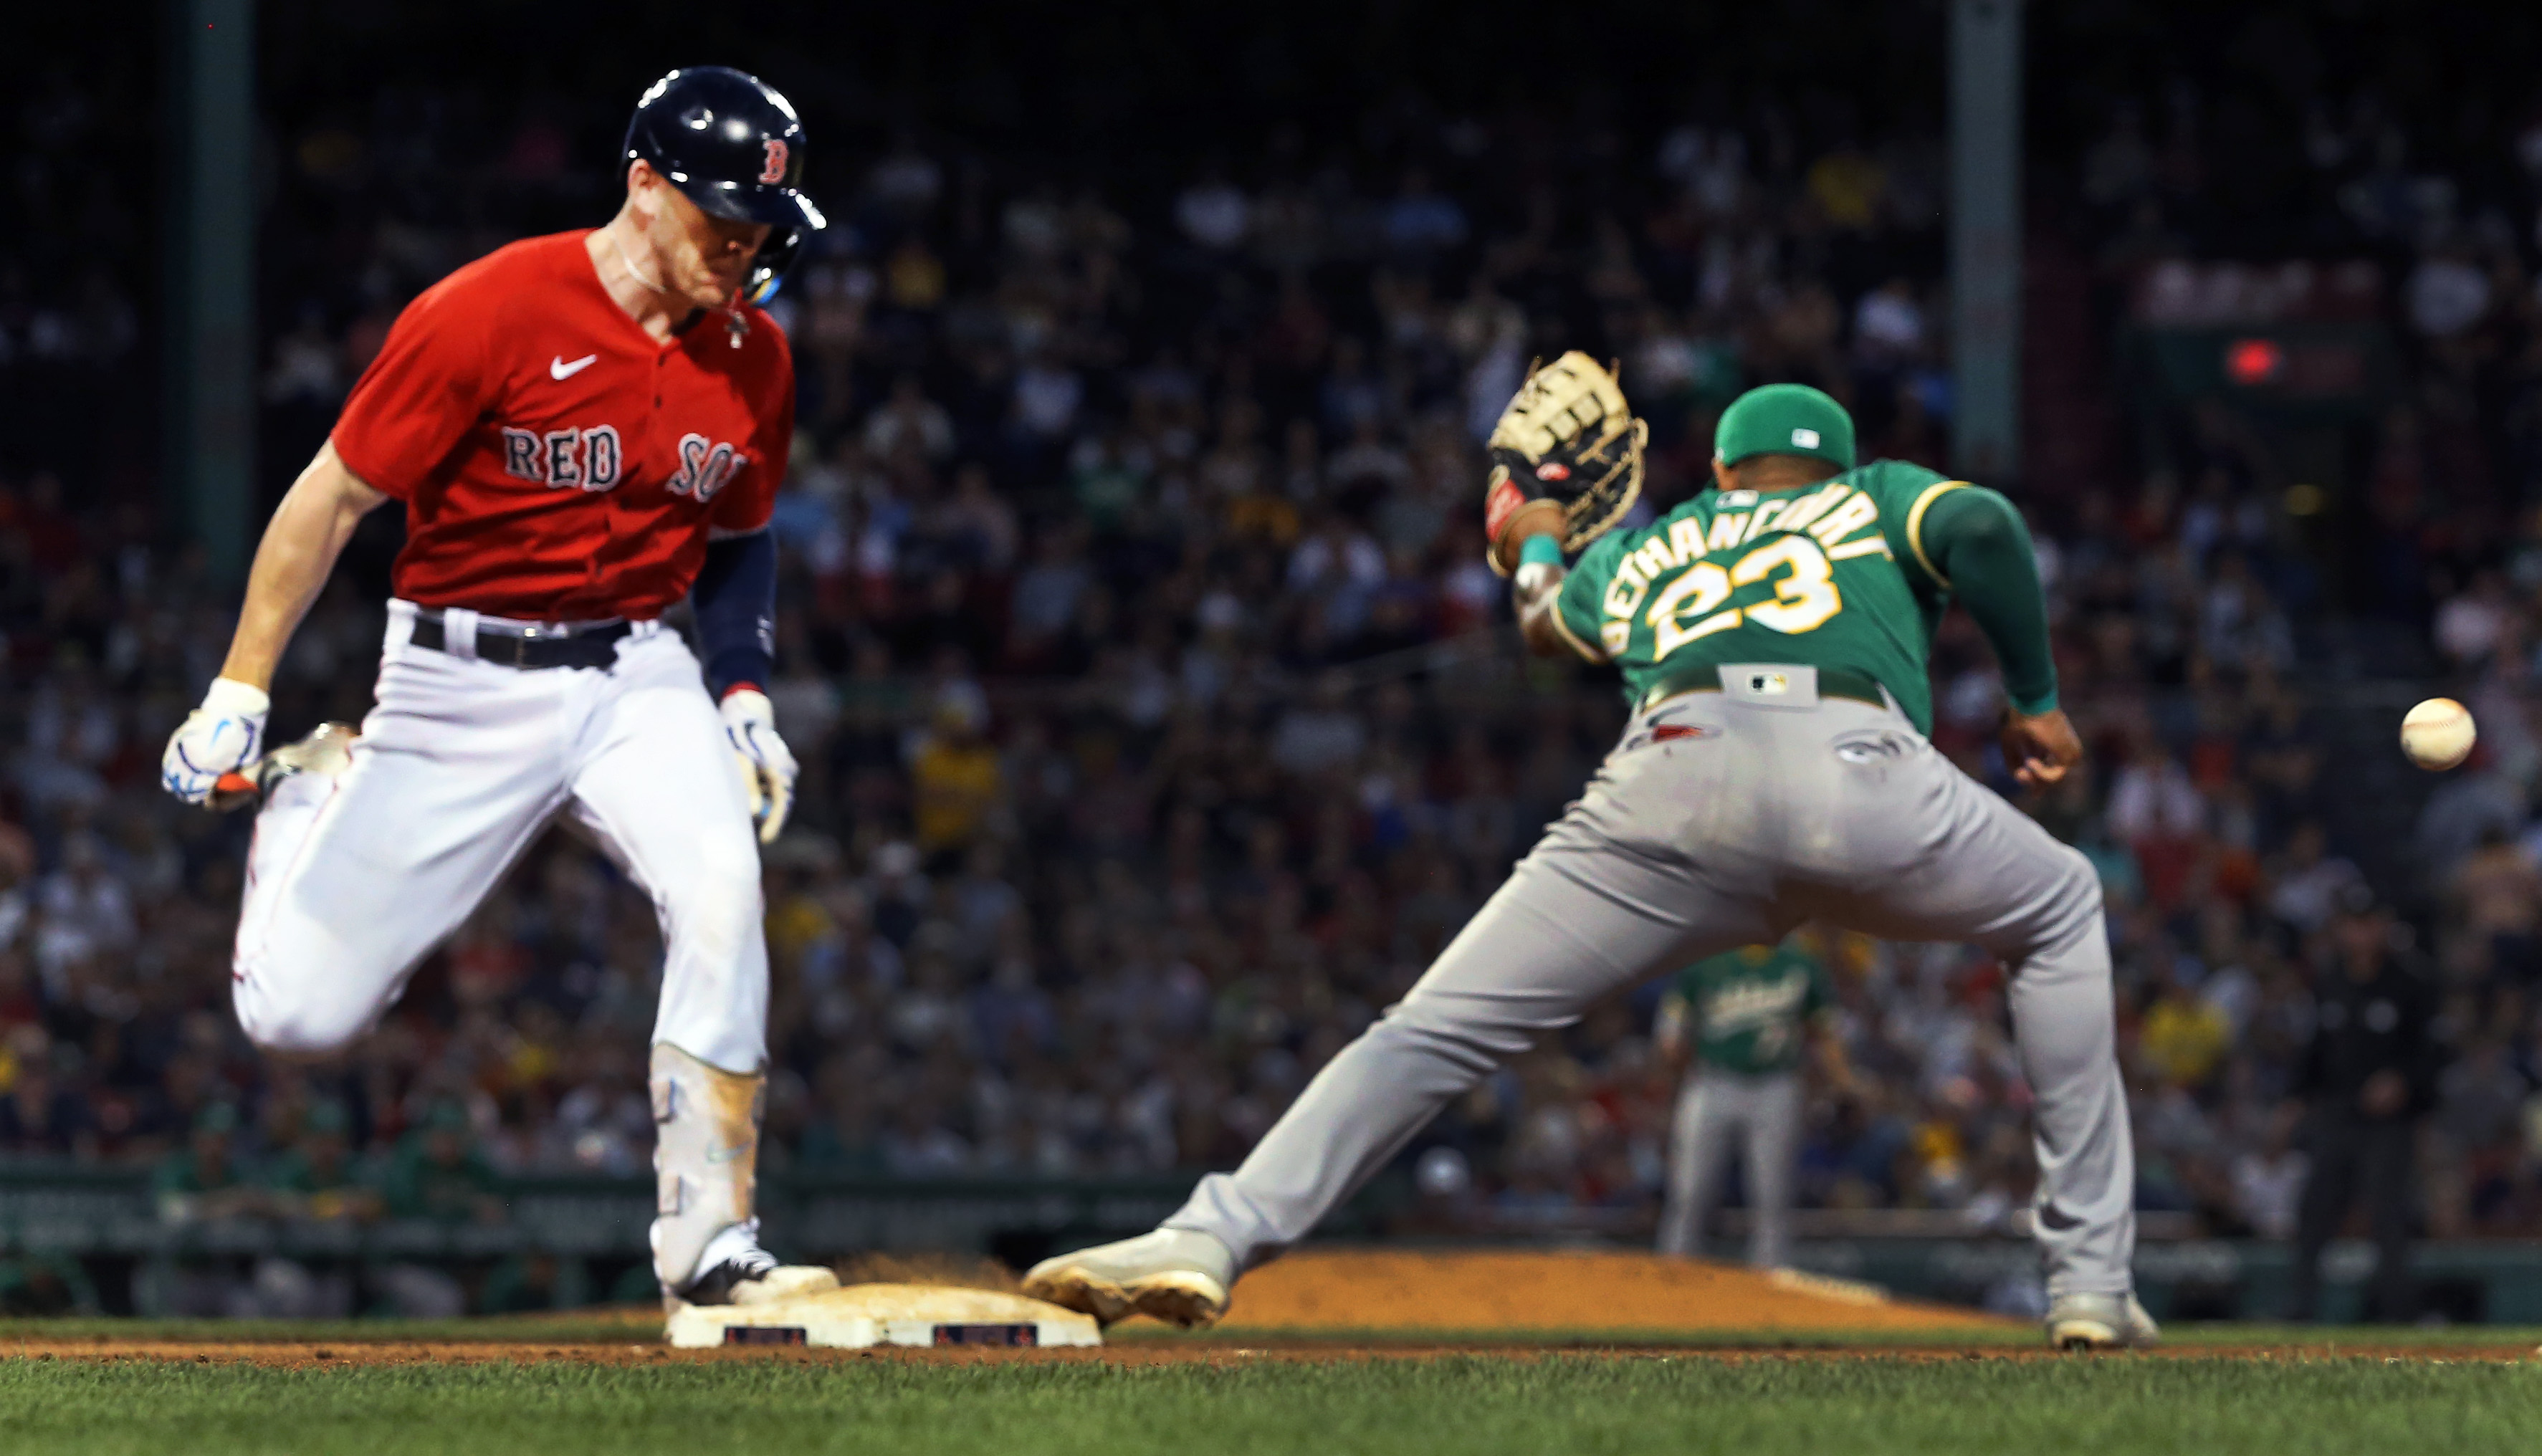 All about Red Sox star Trevor Story with stats and contract info – NBC  Sports Boston